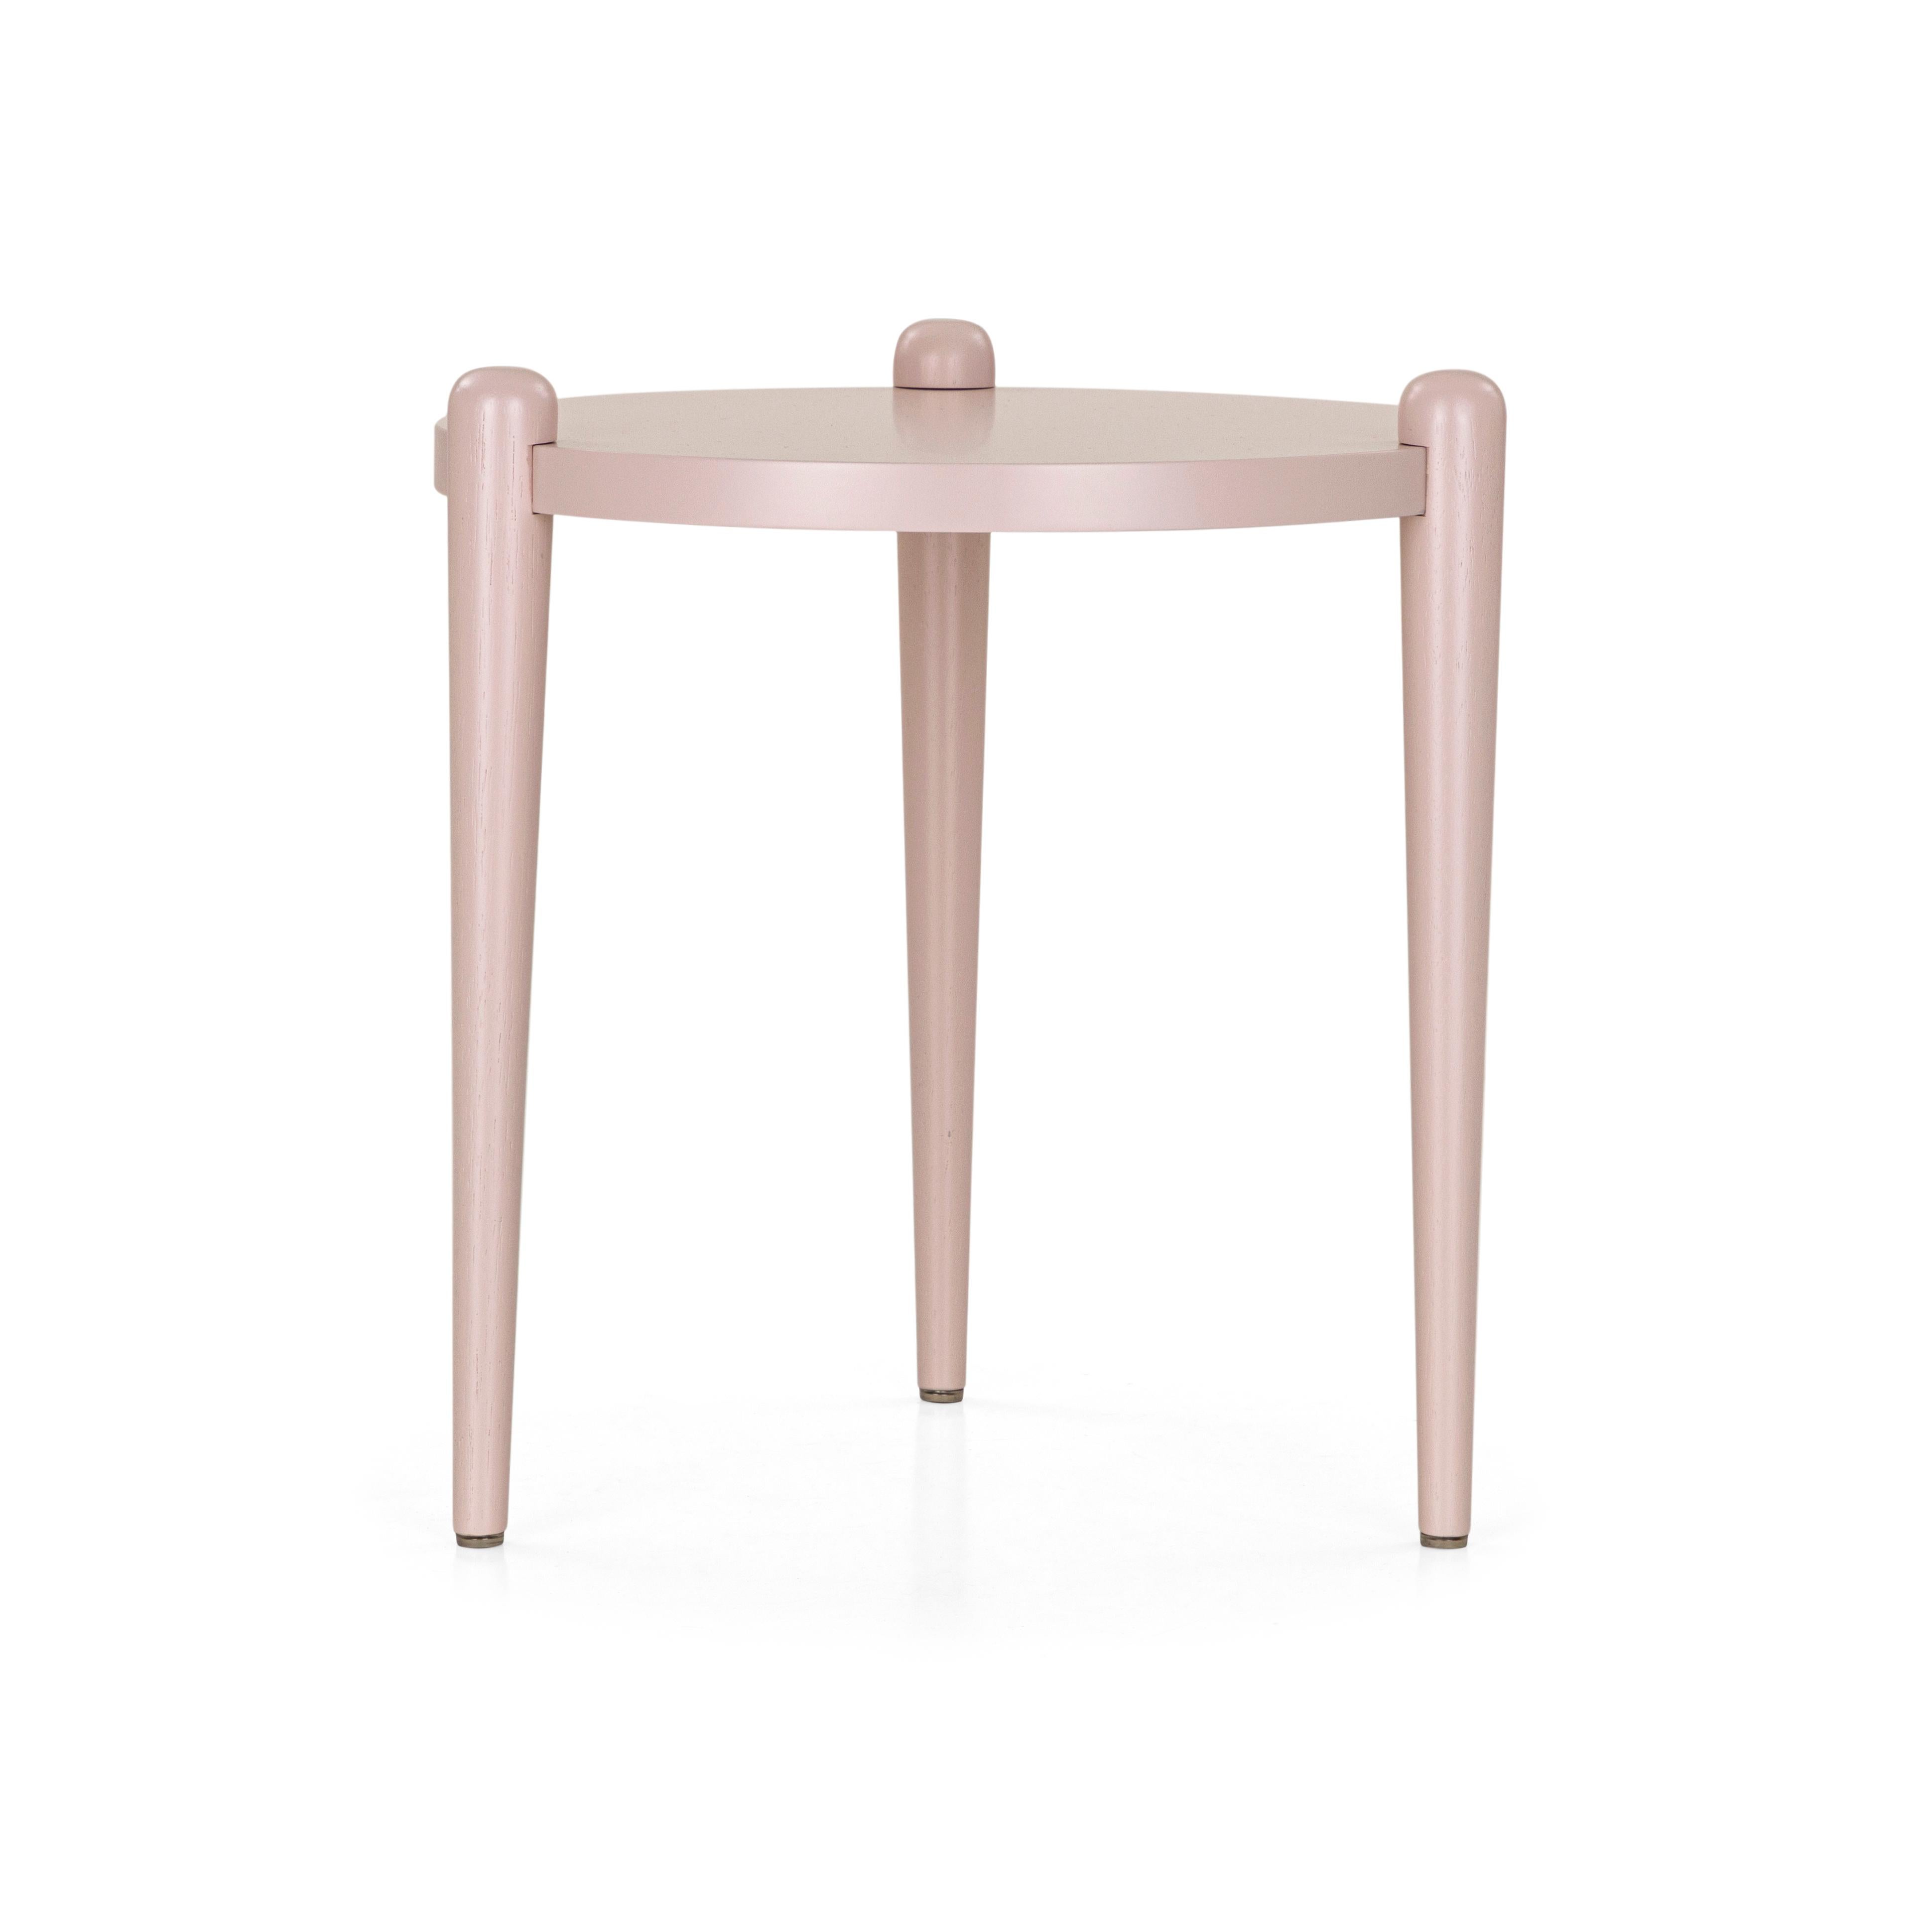 This beautiful set created by our amazing Uultis design team is a set of three occasional tables in light pink quartz with cone-shaped feet that gives a retro touch providing a sophisticated style that you will not regret having in your house. This